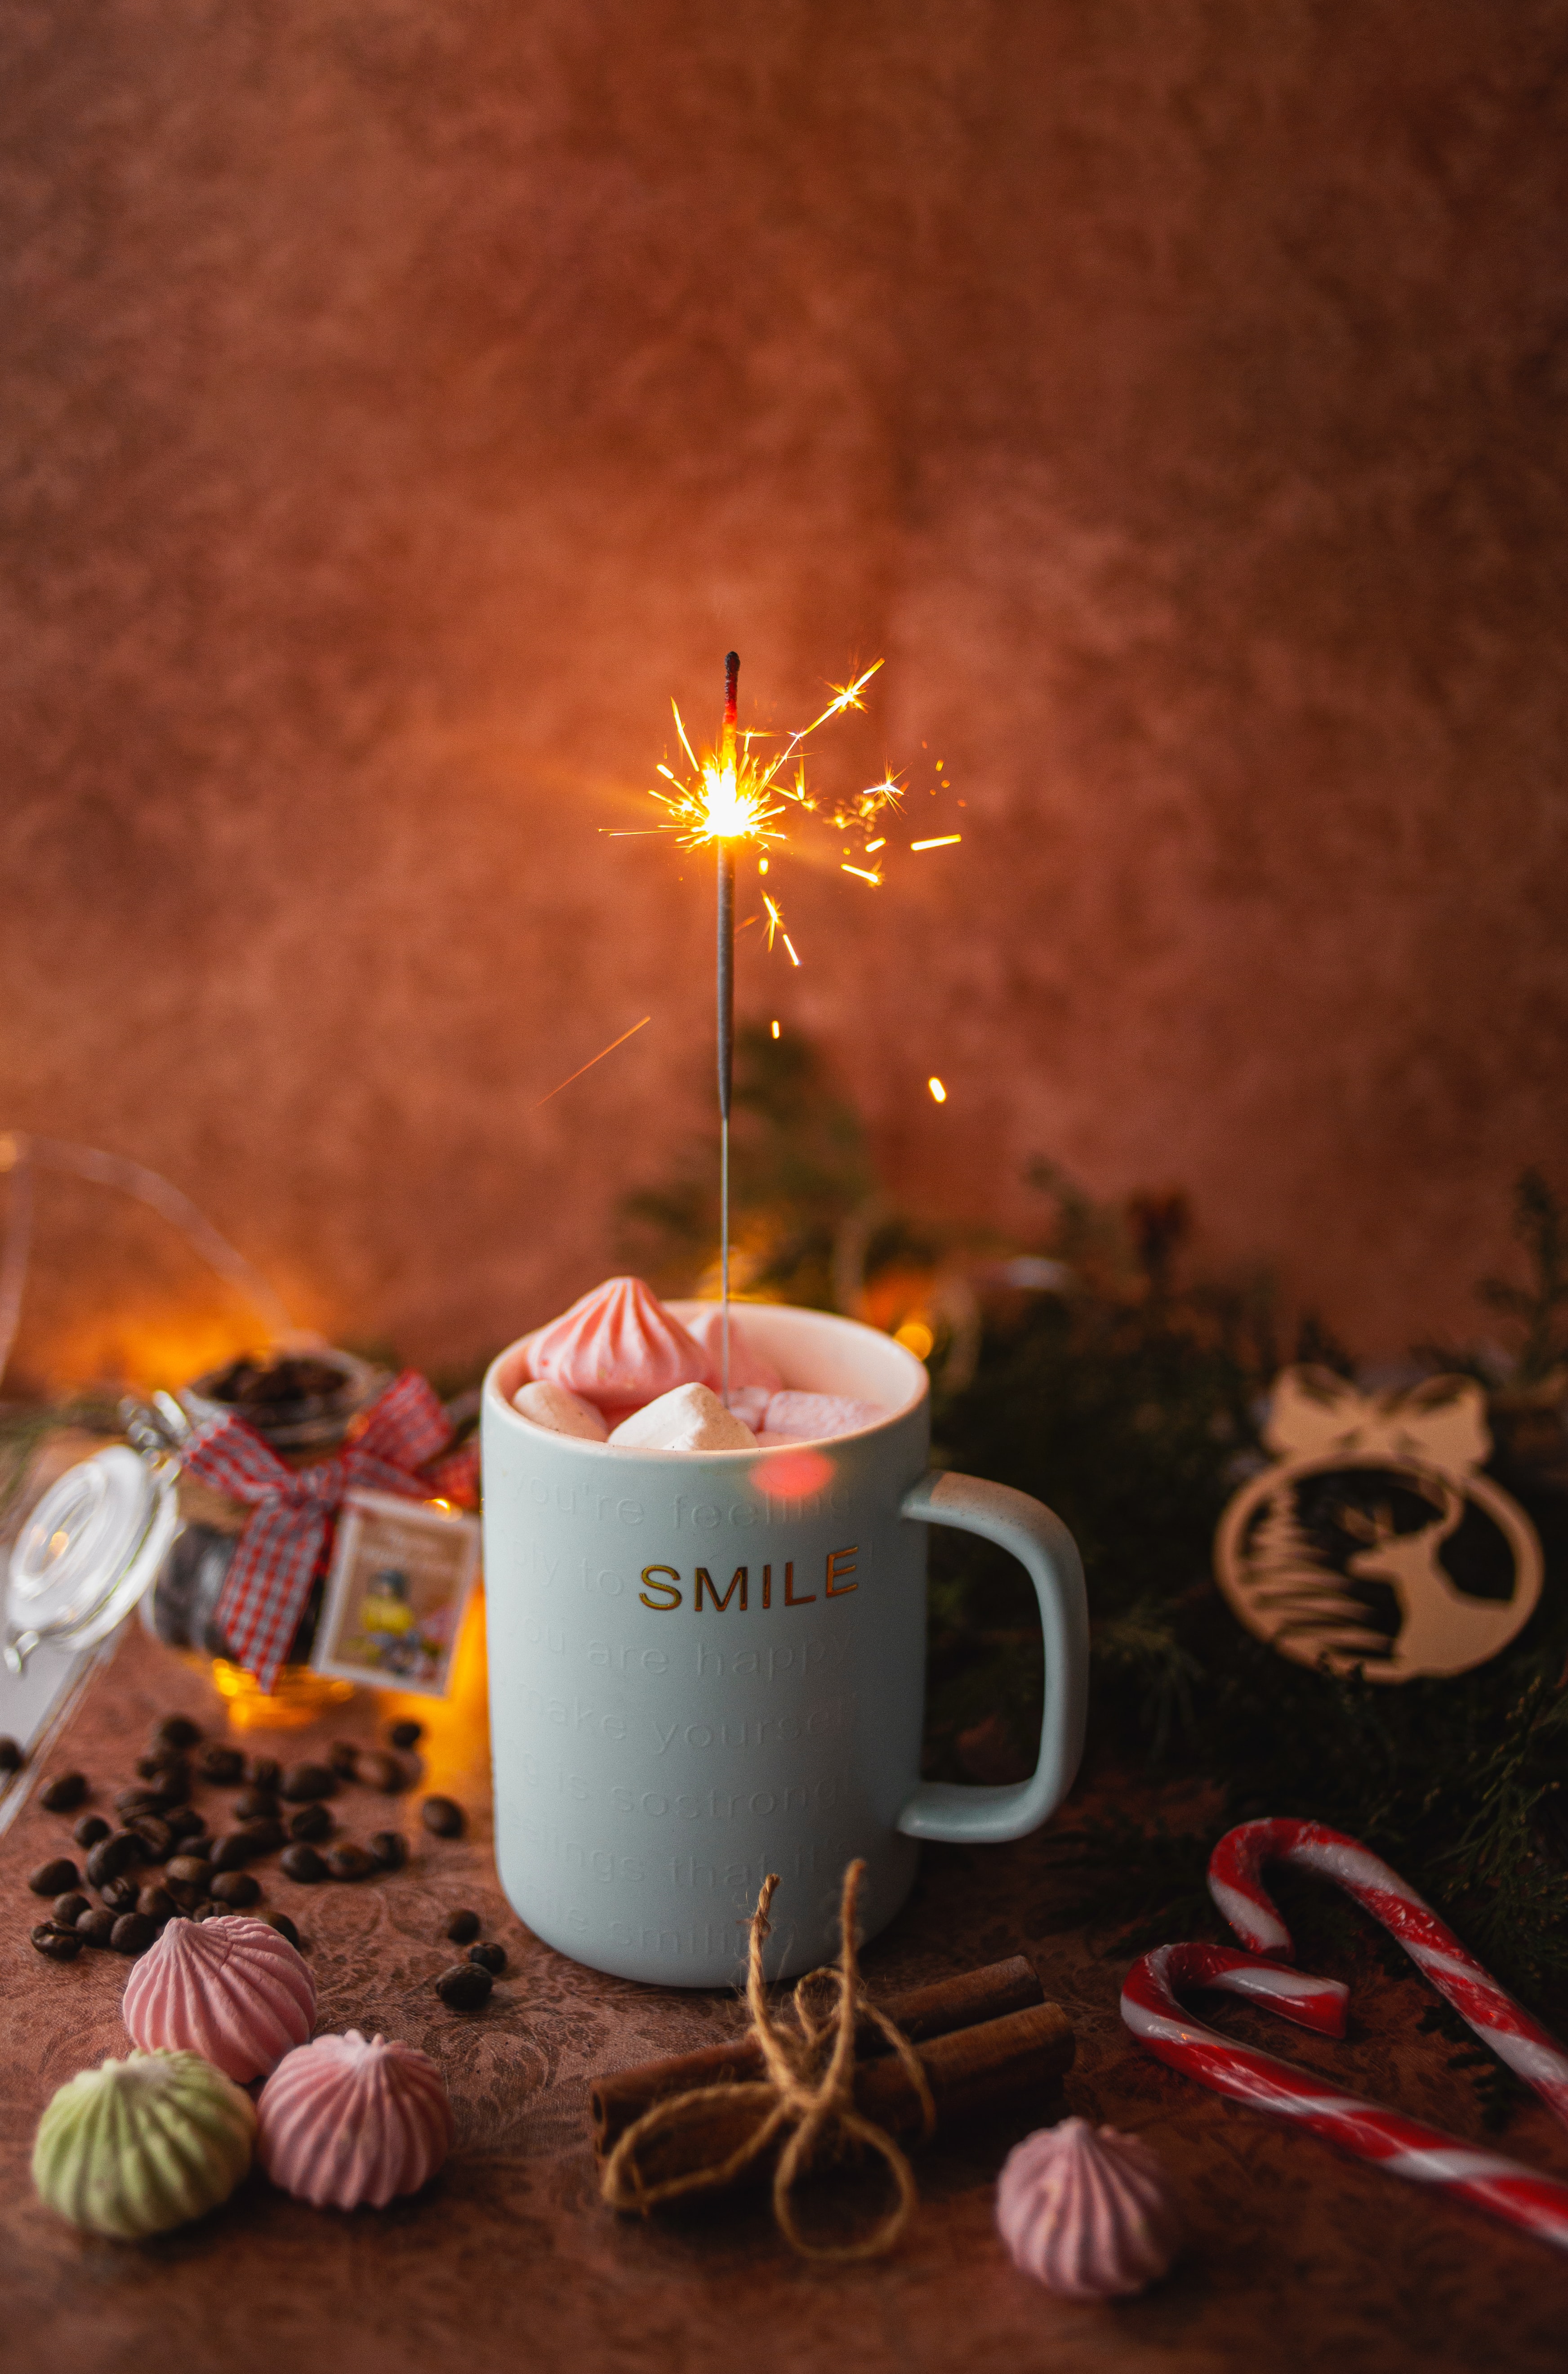 mug, miscellanea, cup, holiday, sparks, miscellaneous, marshmallow, bengal lights, sparklers, zephyr phone background